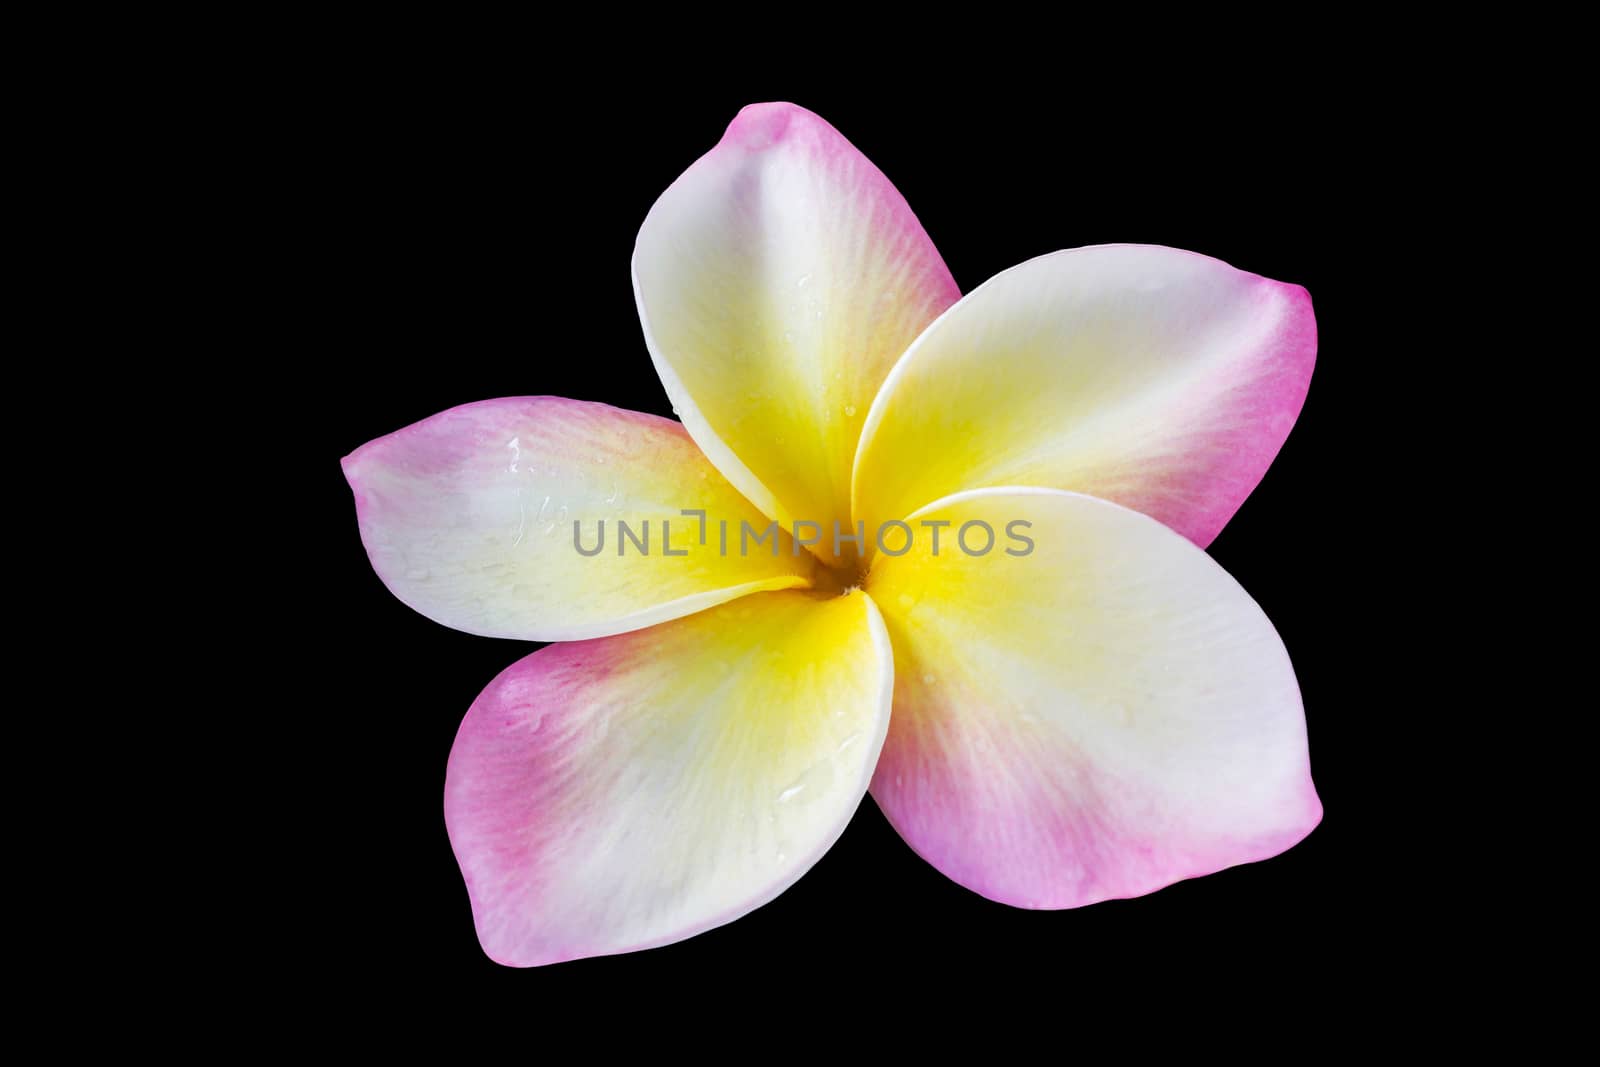 Isolated single blossom beautiful pink yellow and white flower plumeria or frangipani with water drop on petal on white background with clipping path